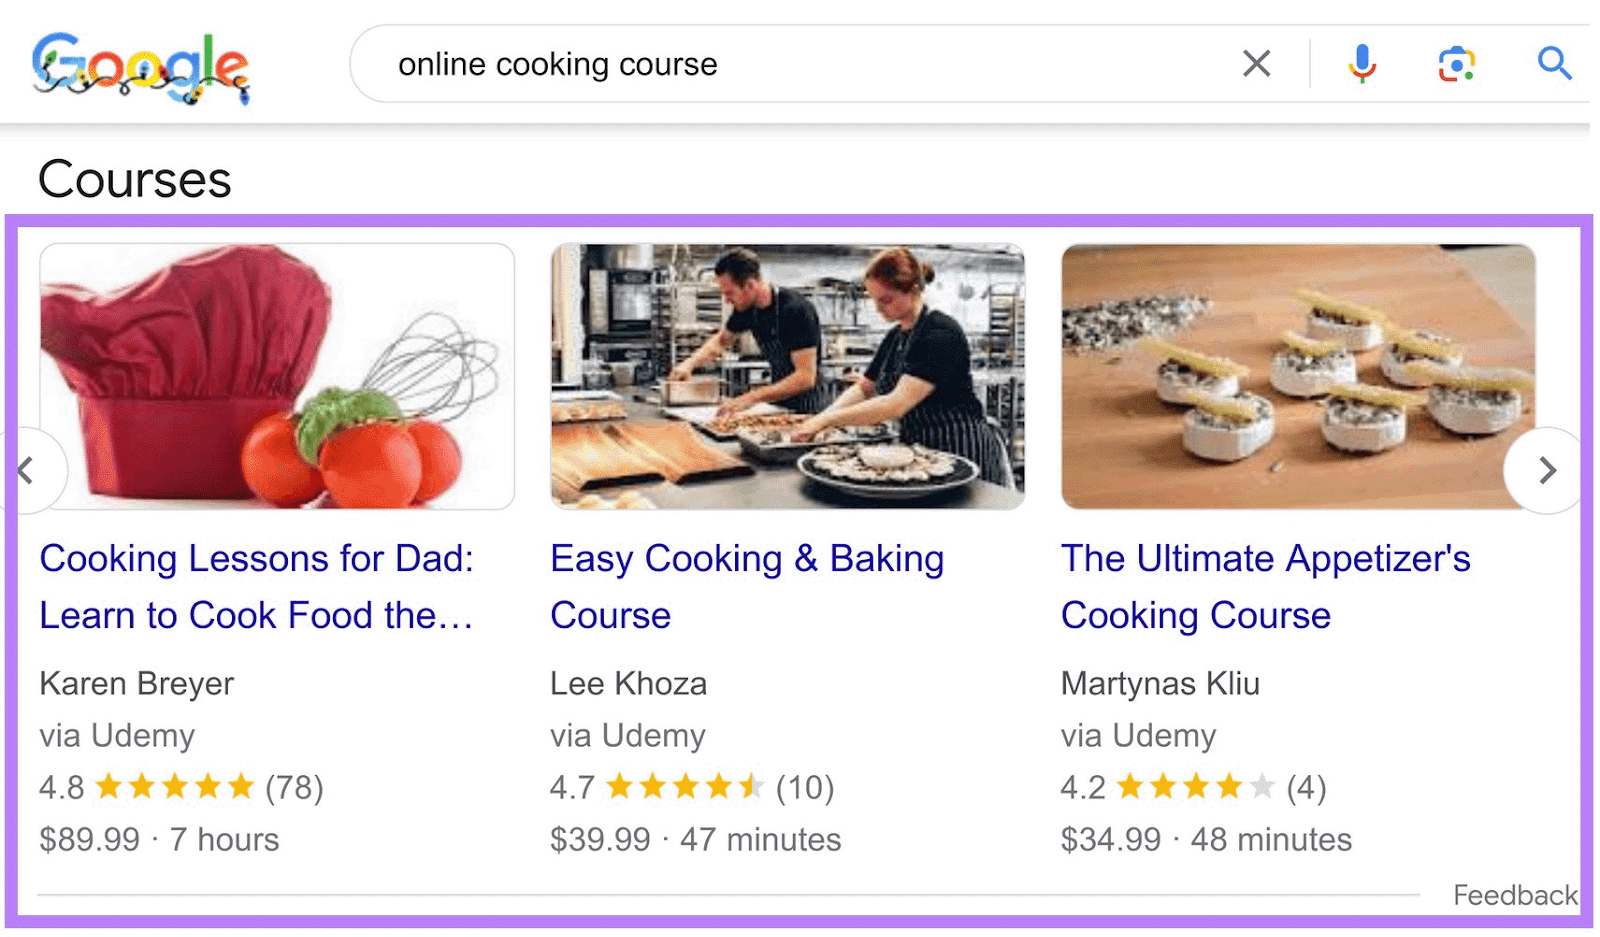 Courses carousel rich result for 'online cooking course' search.